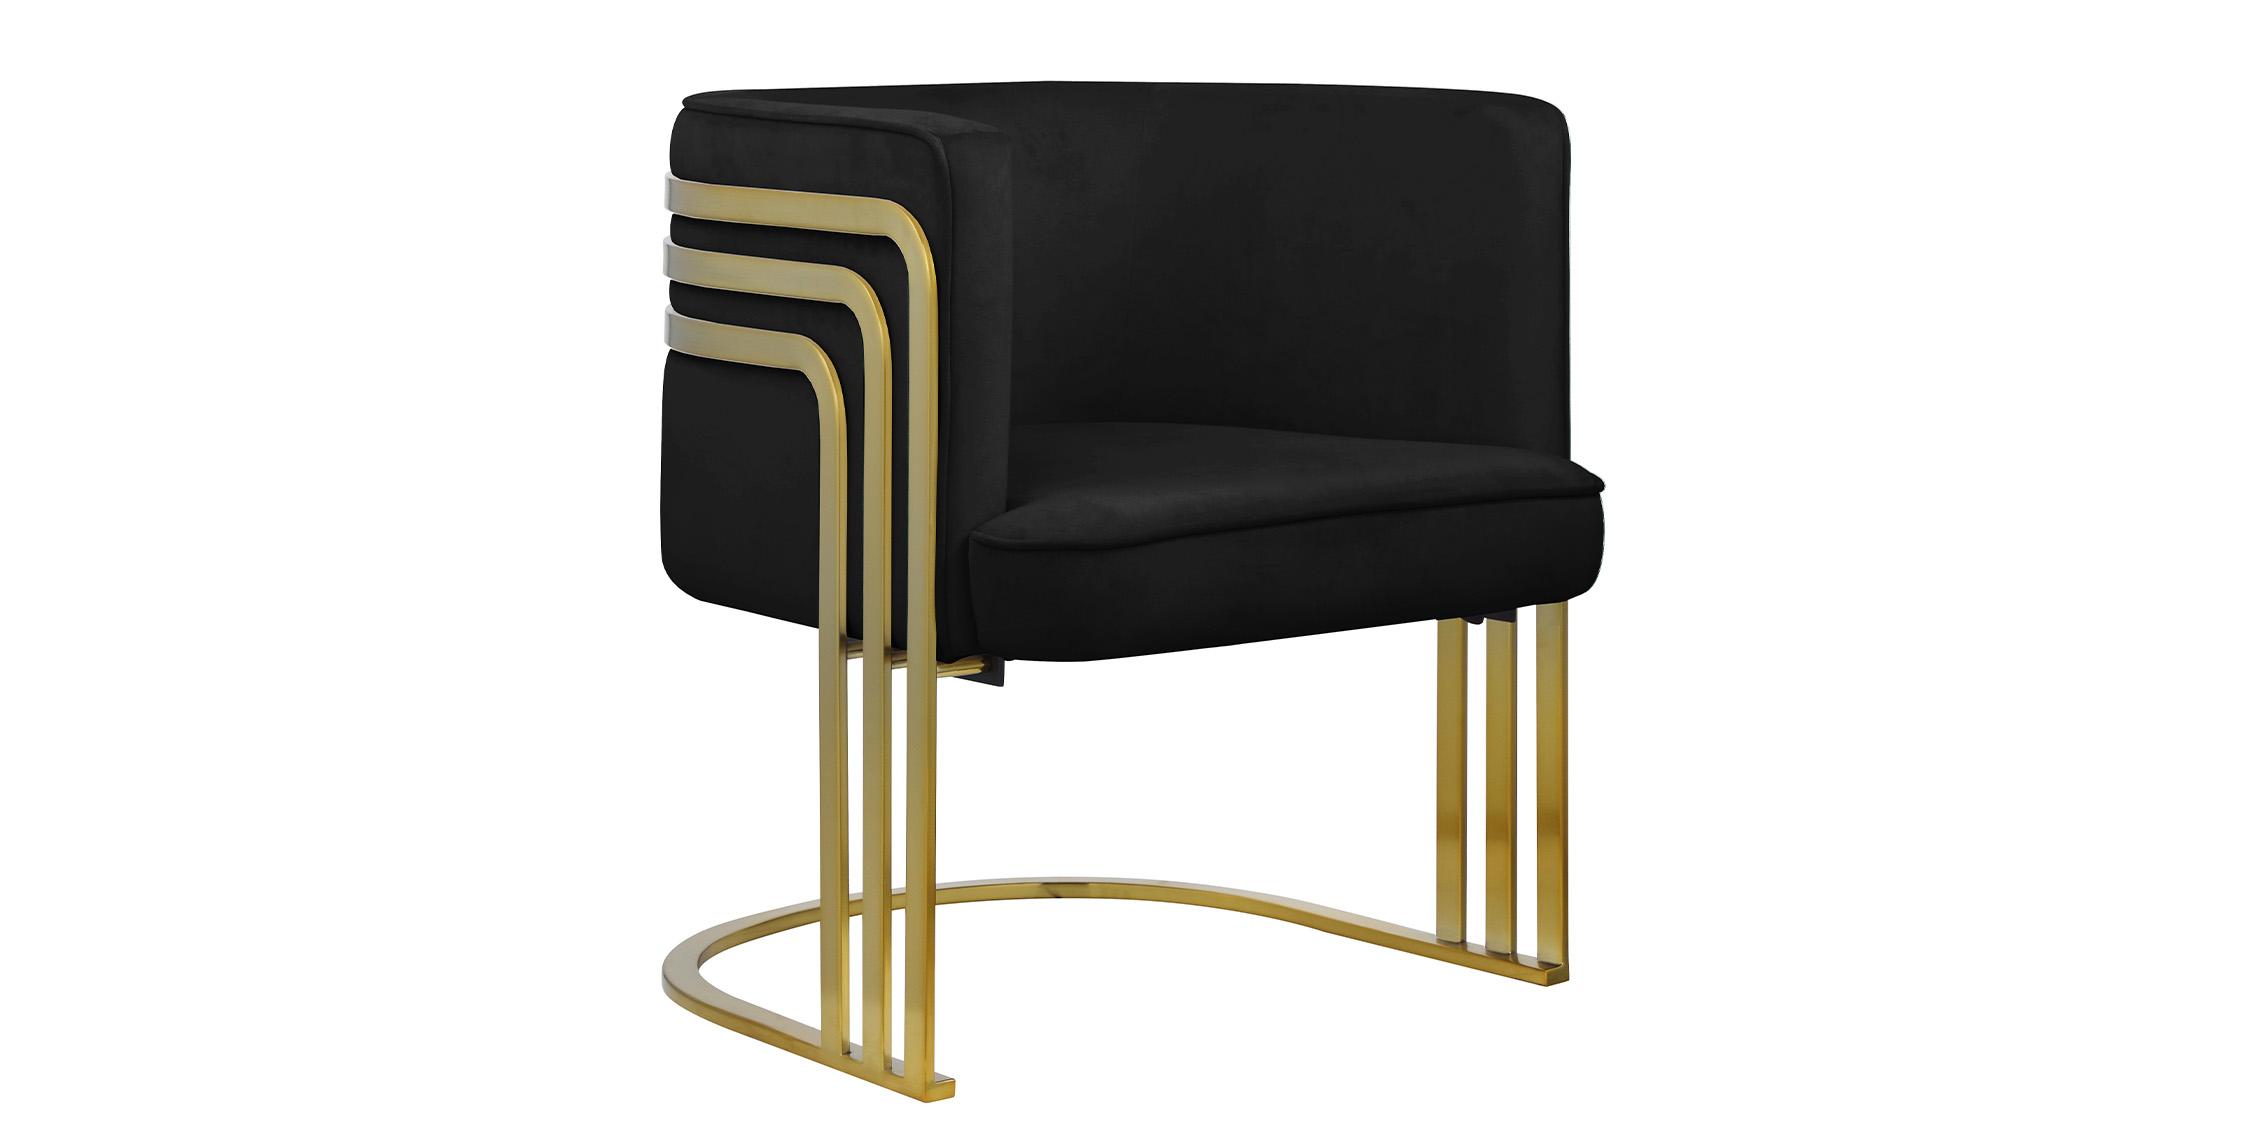 Contemporary Accent Chair RAYS 533Black 533Black in Gold, Black Velvet